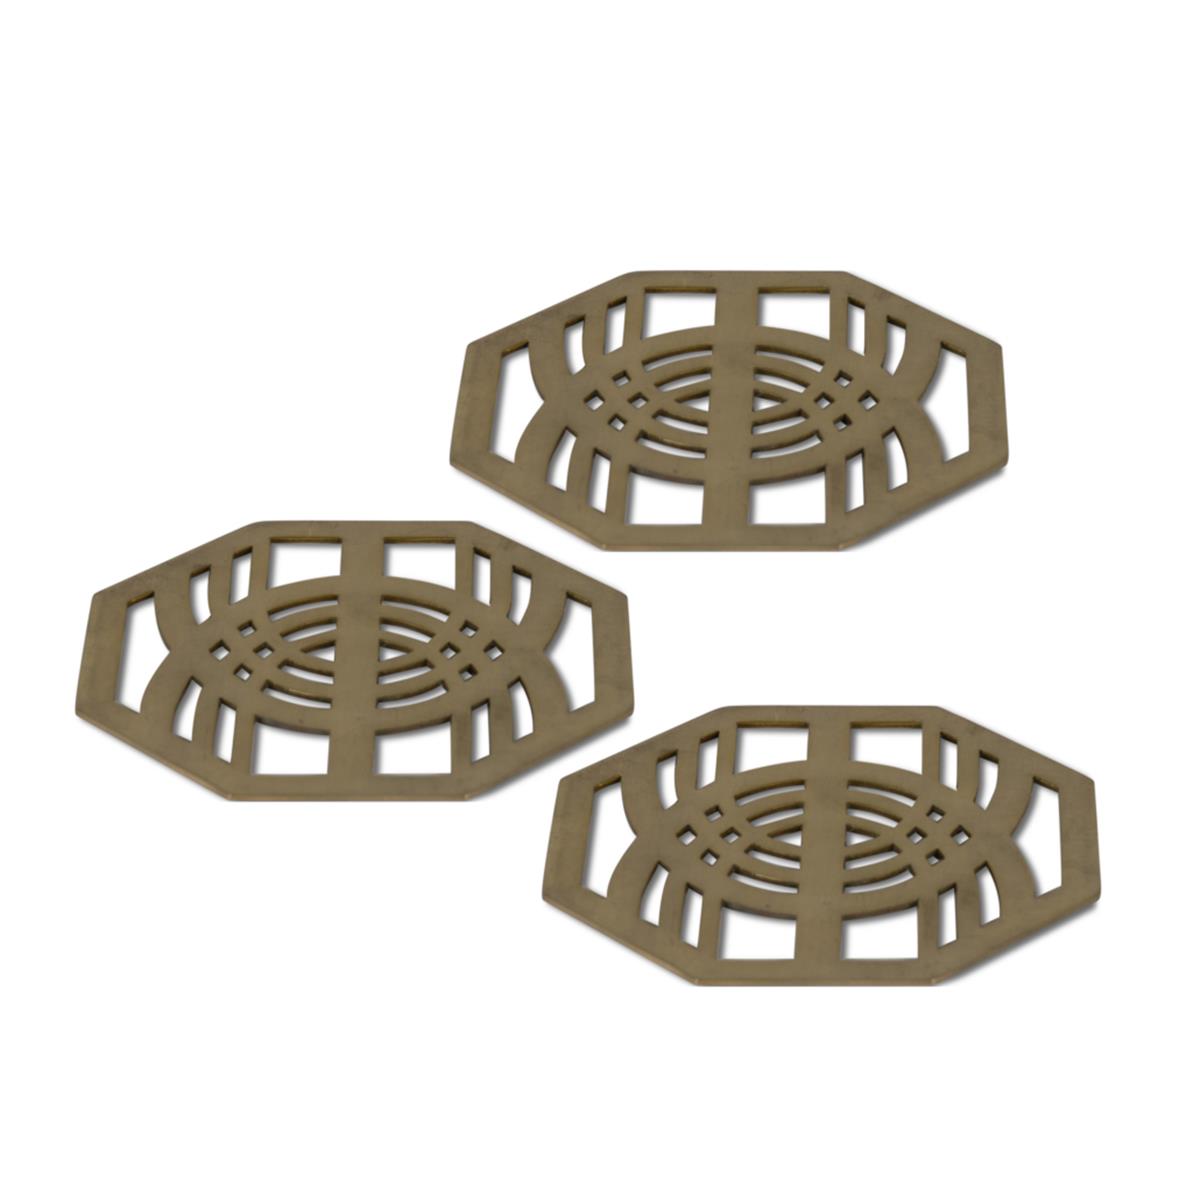 Picture of Authentic Models BA012 Steel Coasters, Gold - Set of 3